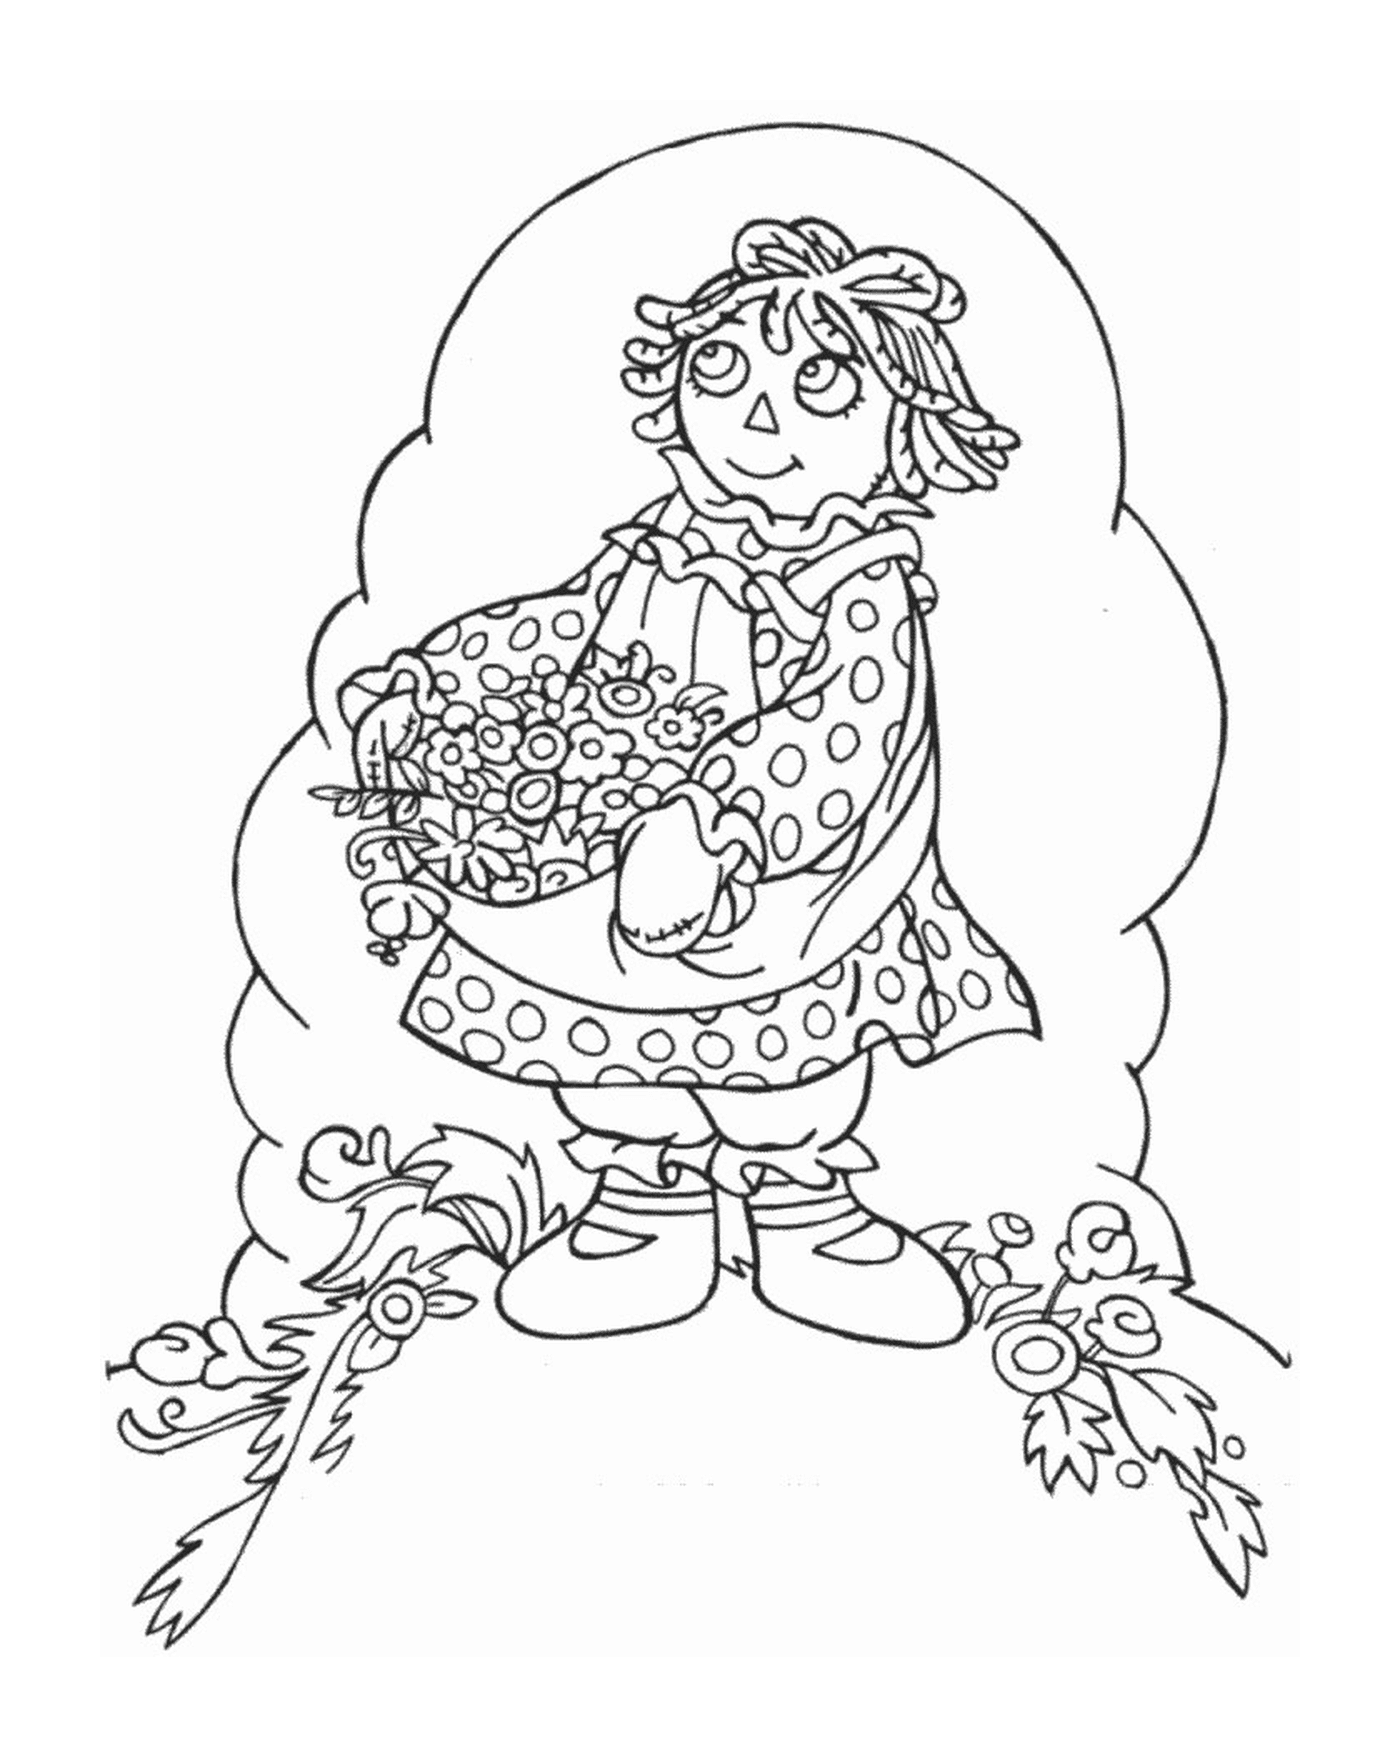  A girl holding a basket of flowers 